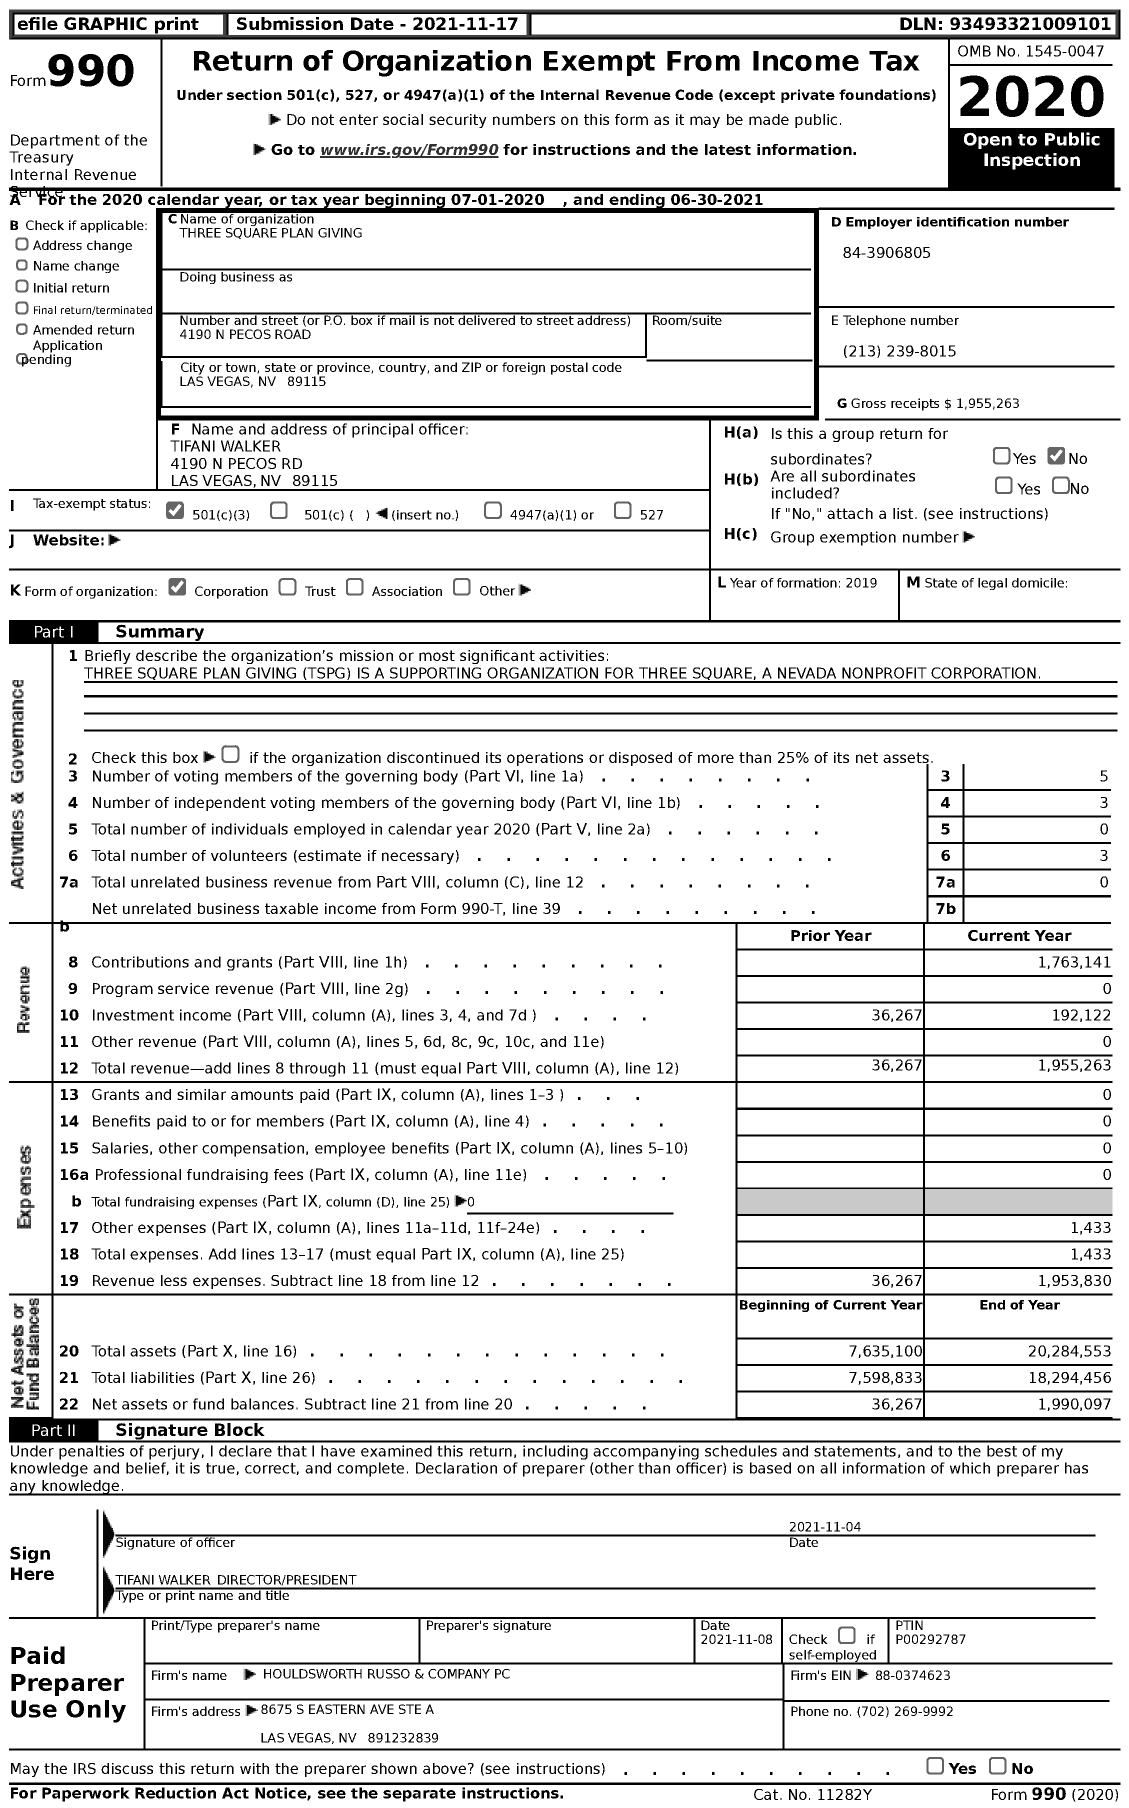 Image of first page of 2020 Form 990 for Three Square Plan Giving